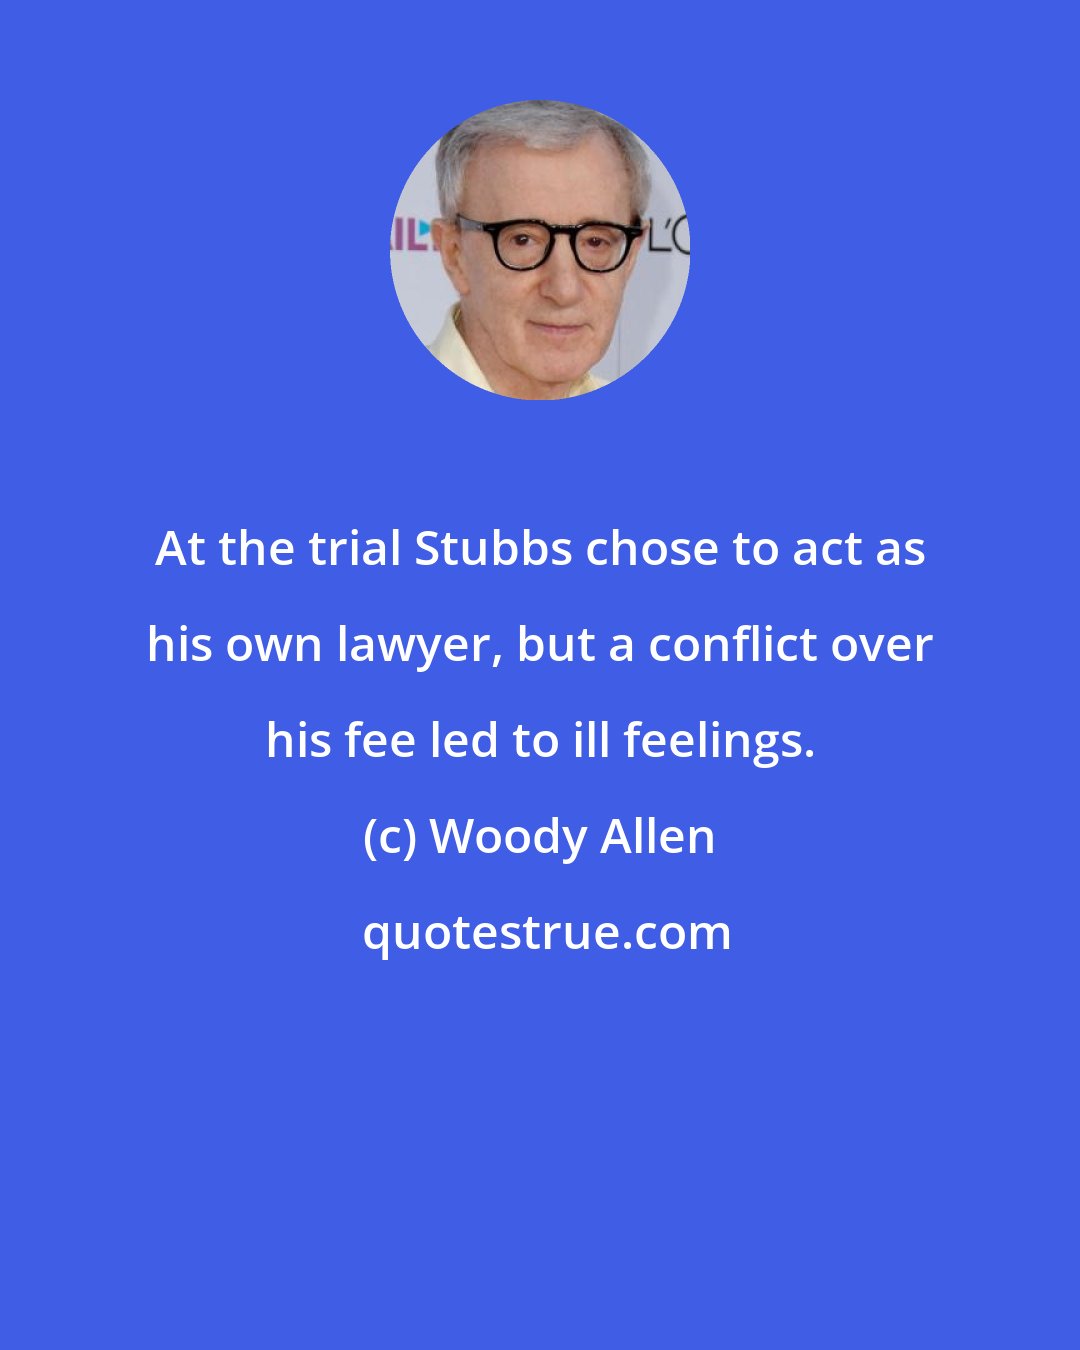 Woody Allen: At the trial Stubbs chose to act as his own lawyer, but a conflict over his fee led to ill feelings.